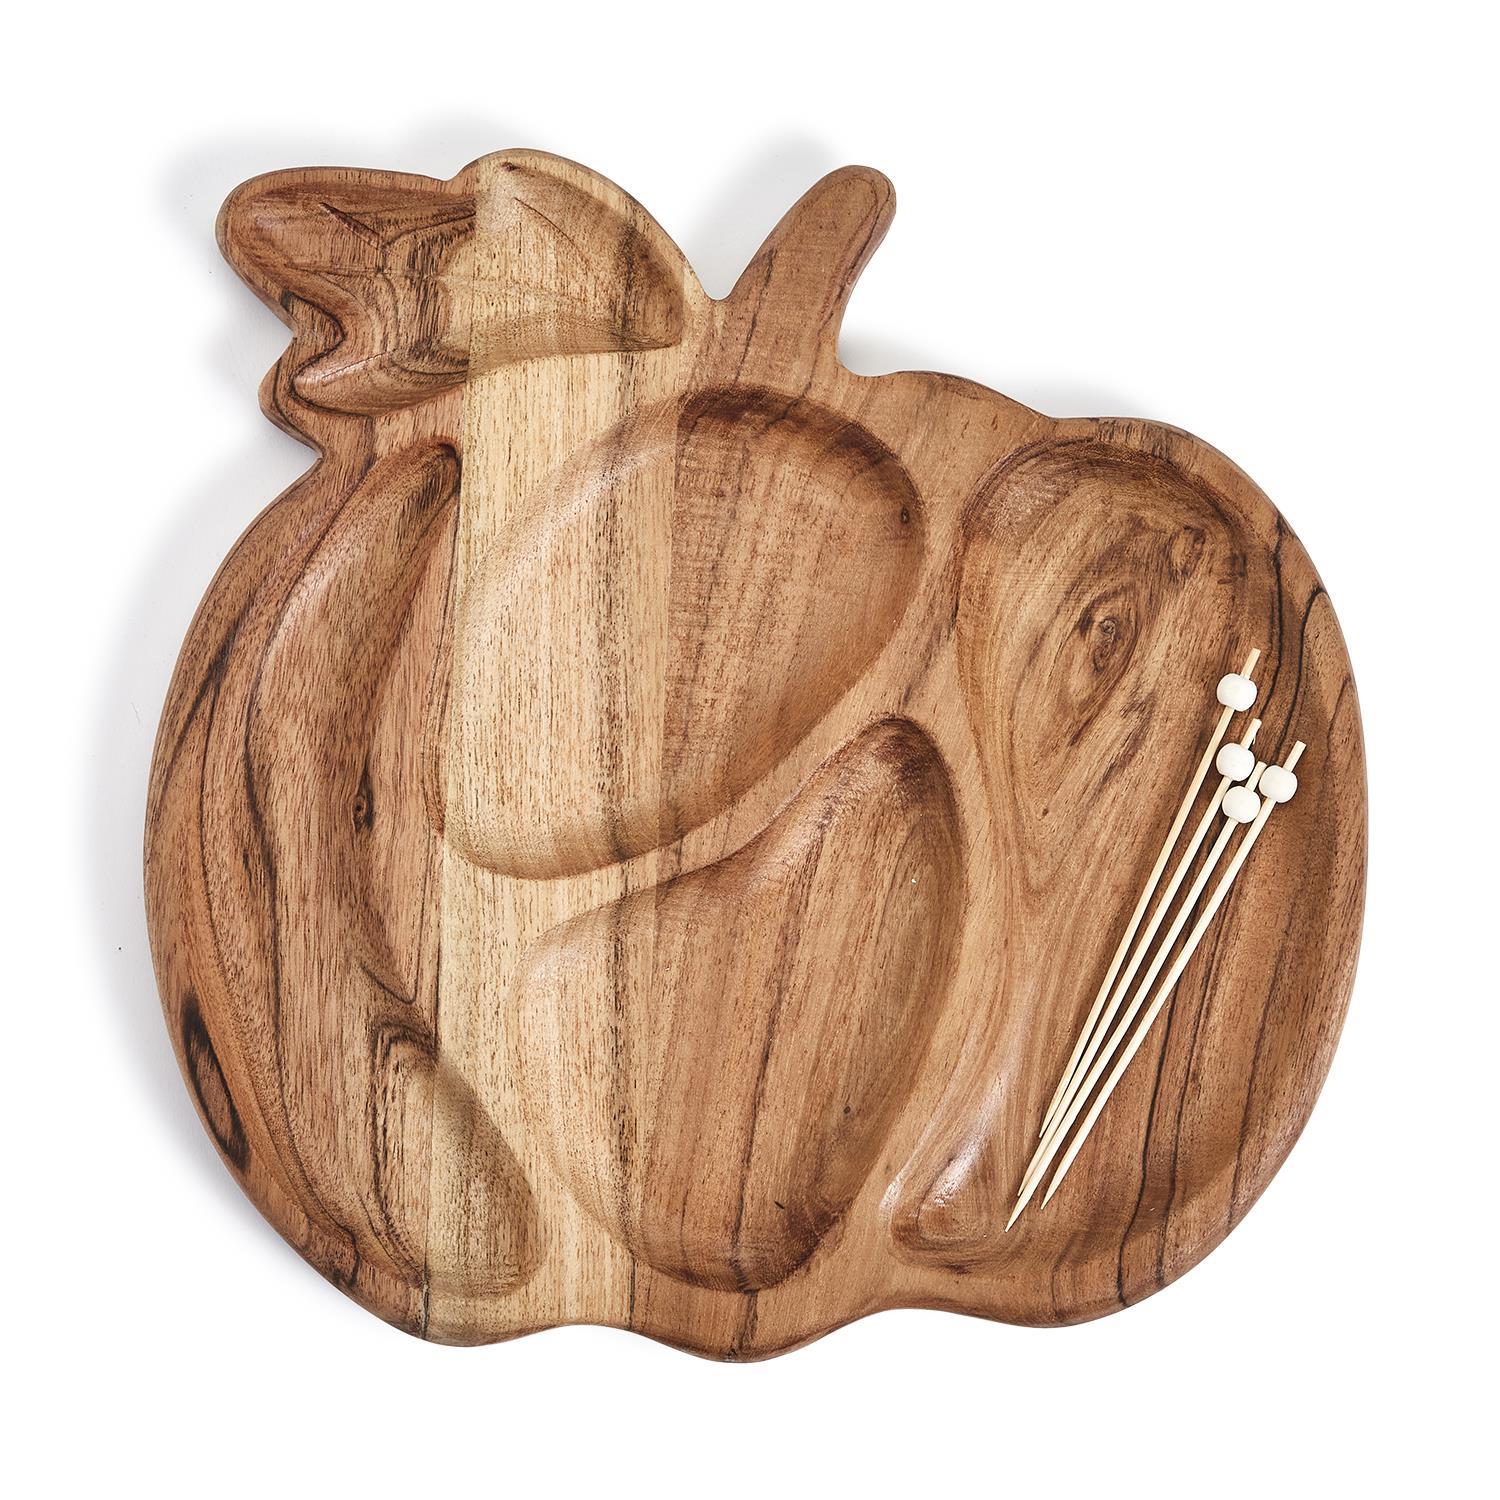 Gather Hand-Crafted Pumpkin Shape Sectional Charcuterie Board Wood Picks